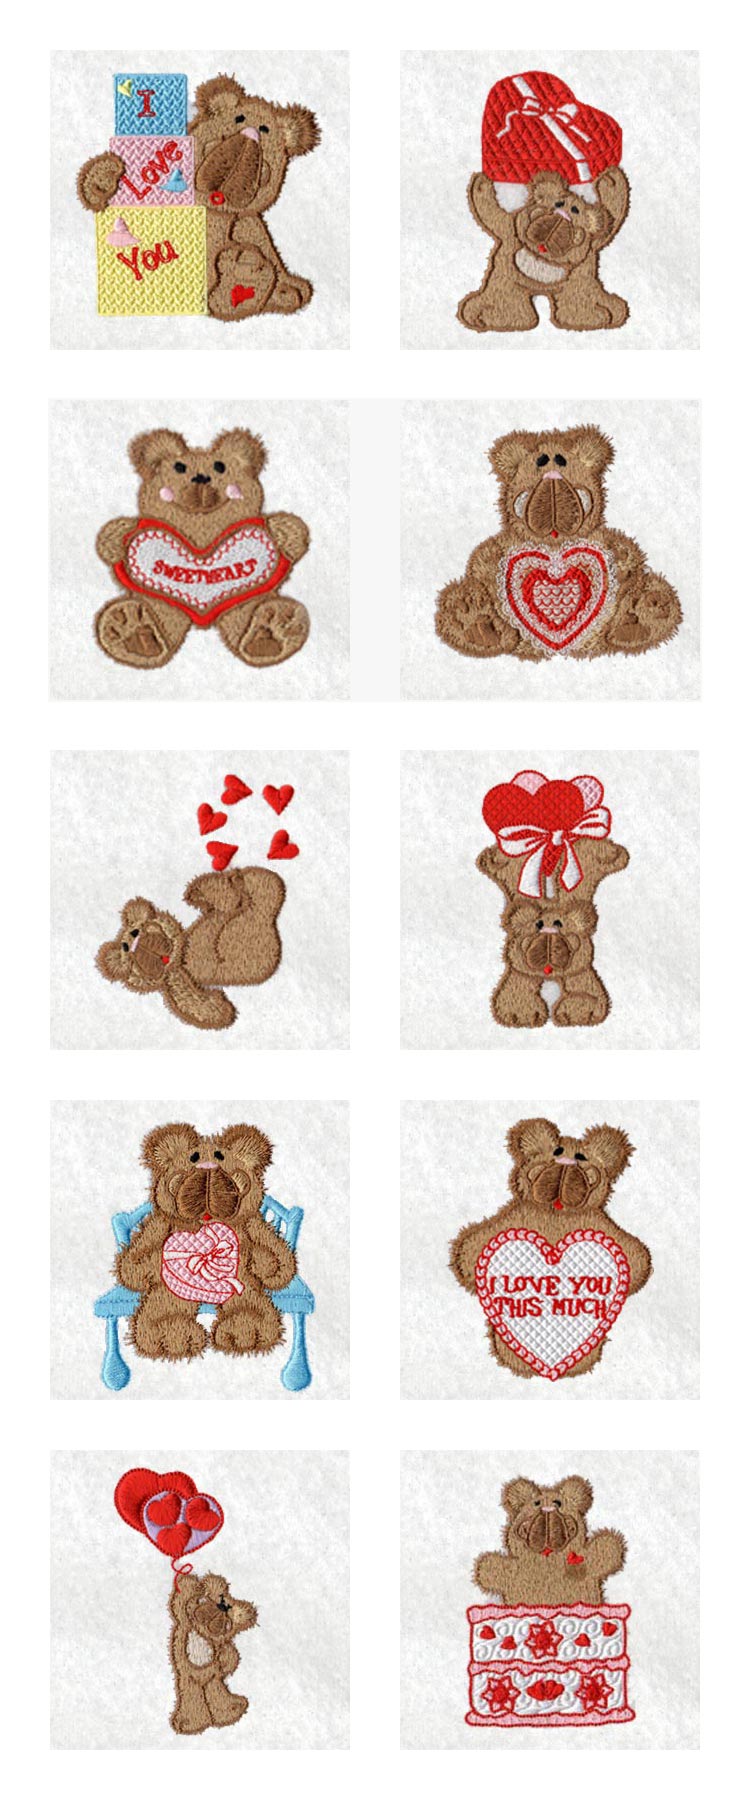 Fuzzy Filled Bears Embroidery Machine Design Details